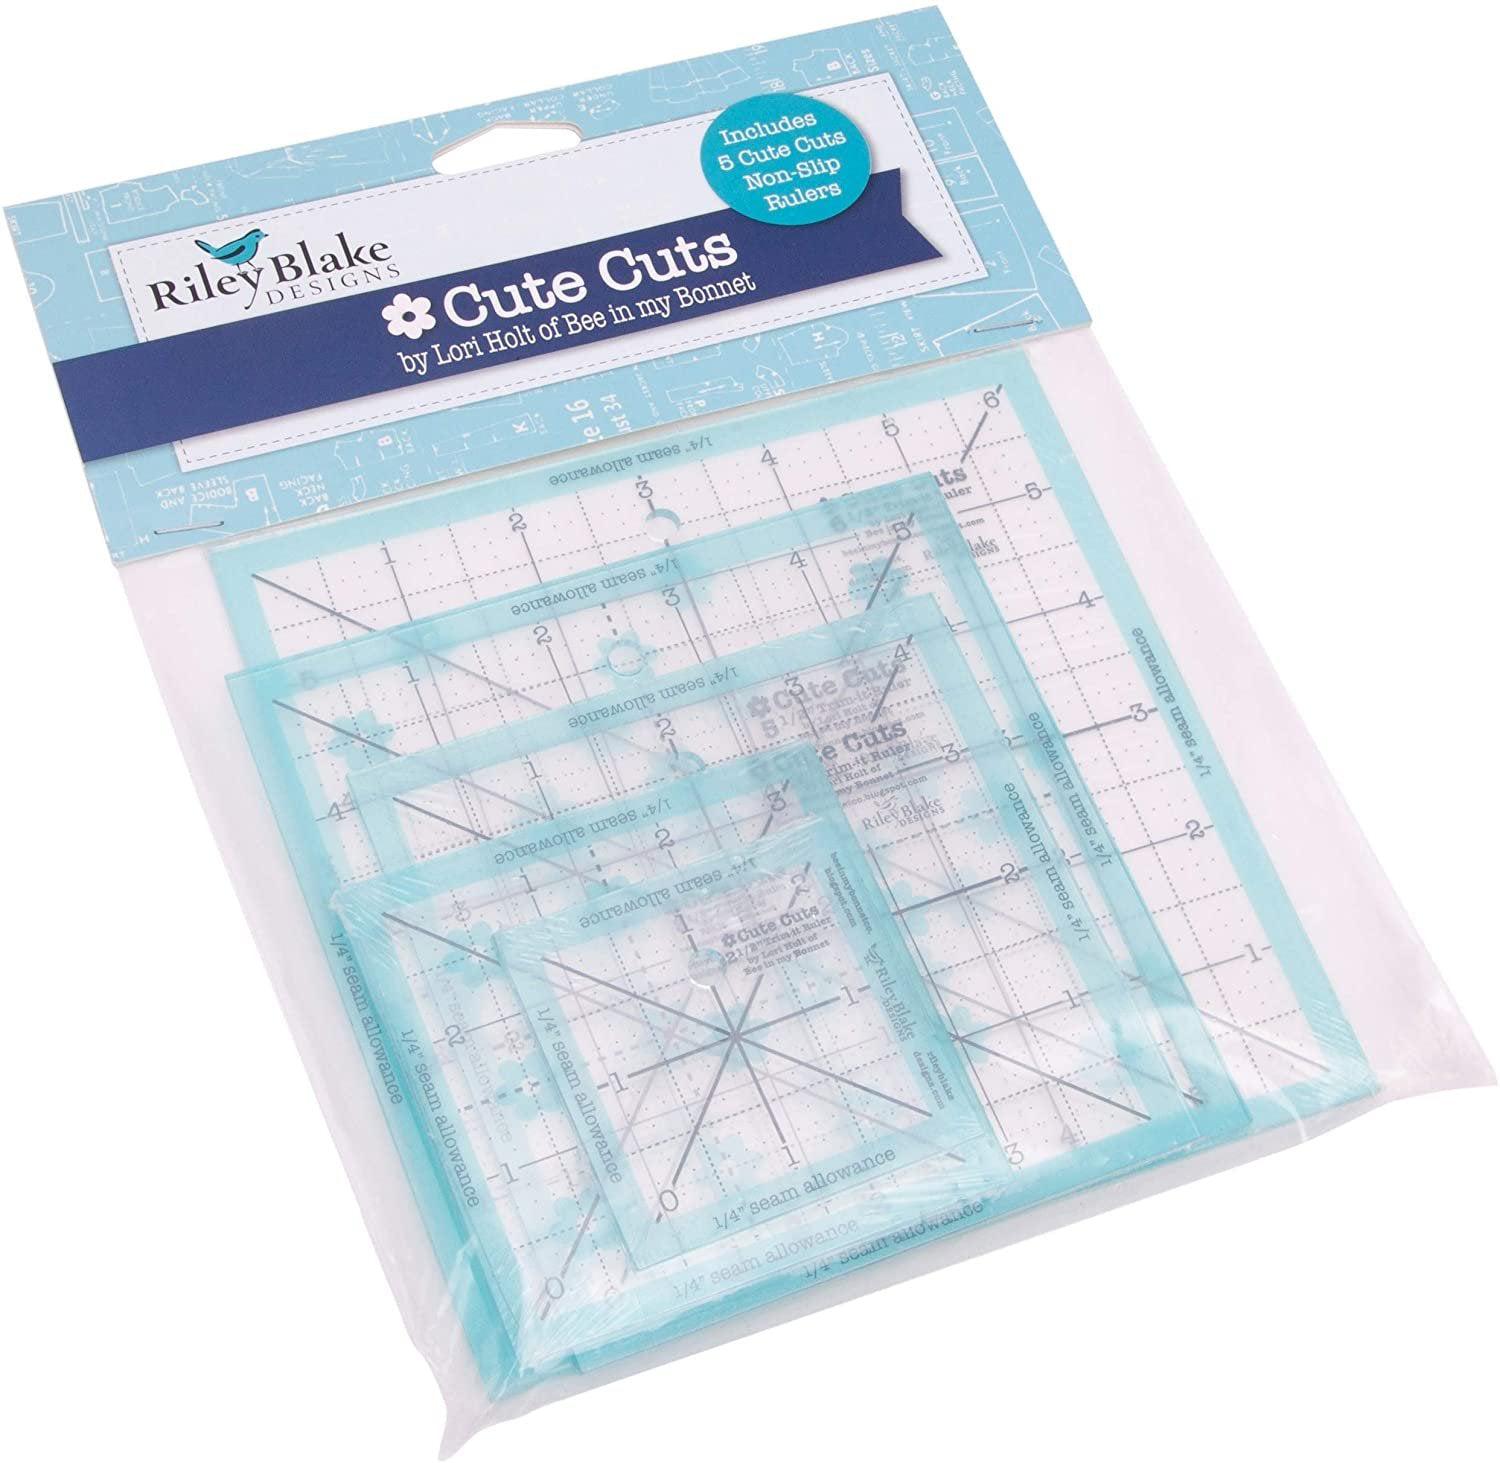 Creative Grids 8.5 Square Quilting Ruler Template CGR8